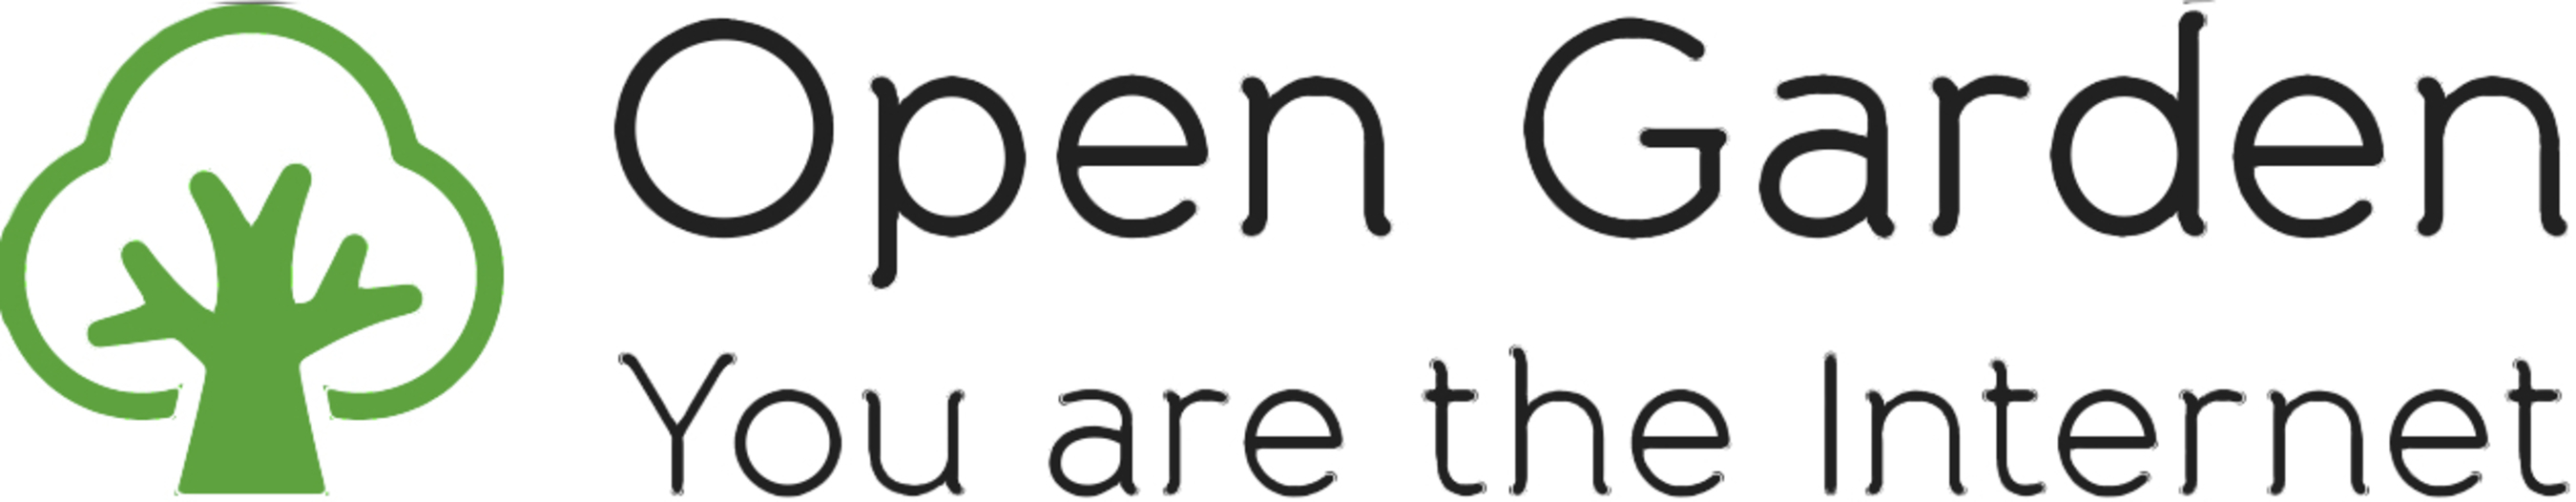 Open Garden is a San Francisco-based startup dedicated to connecting the next 5 billion mobile devices through peer-to-peer technology.